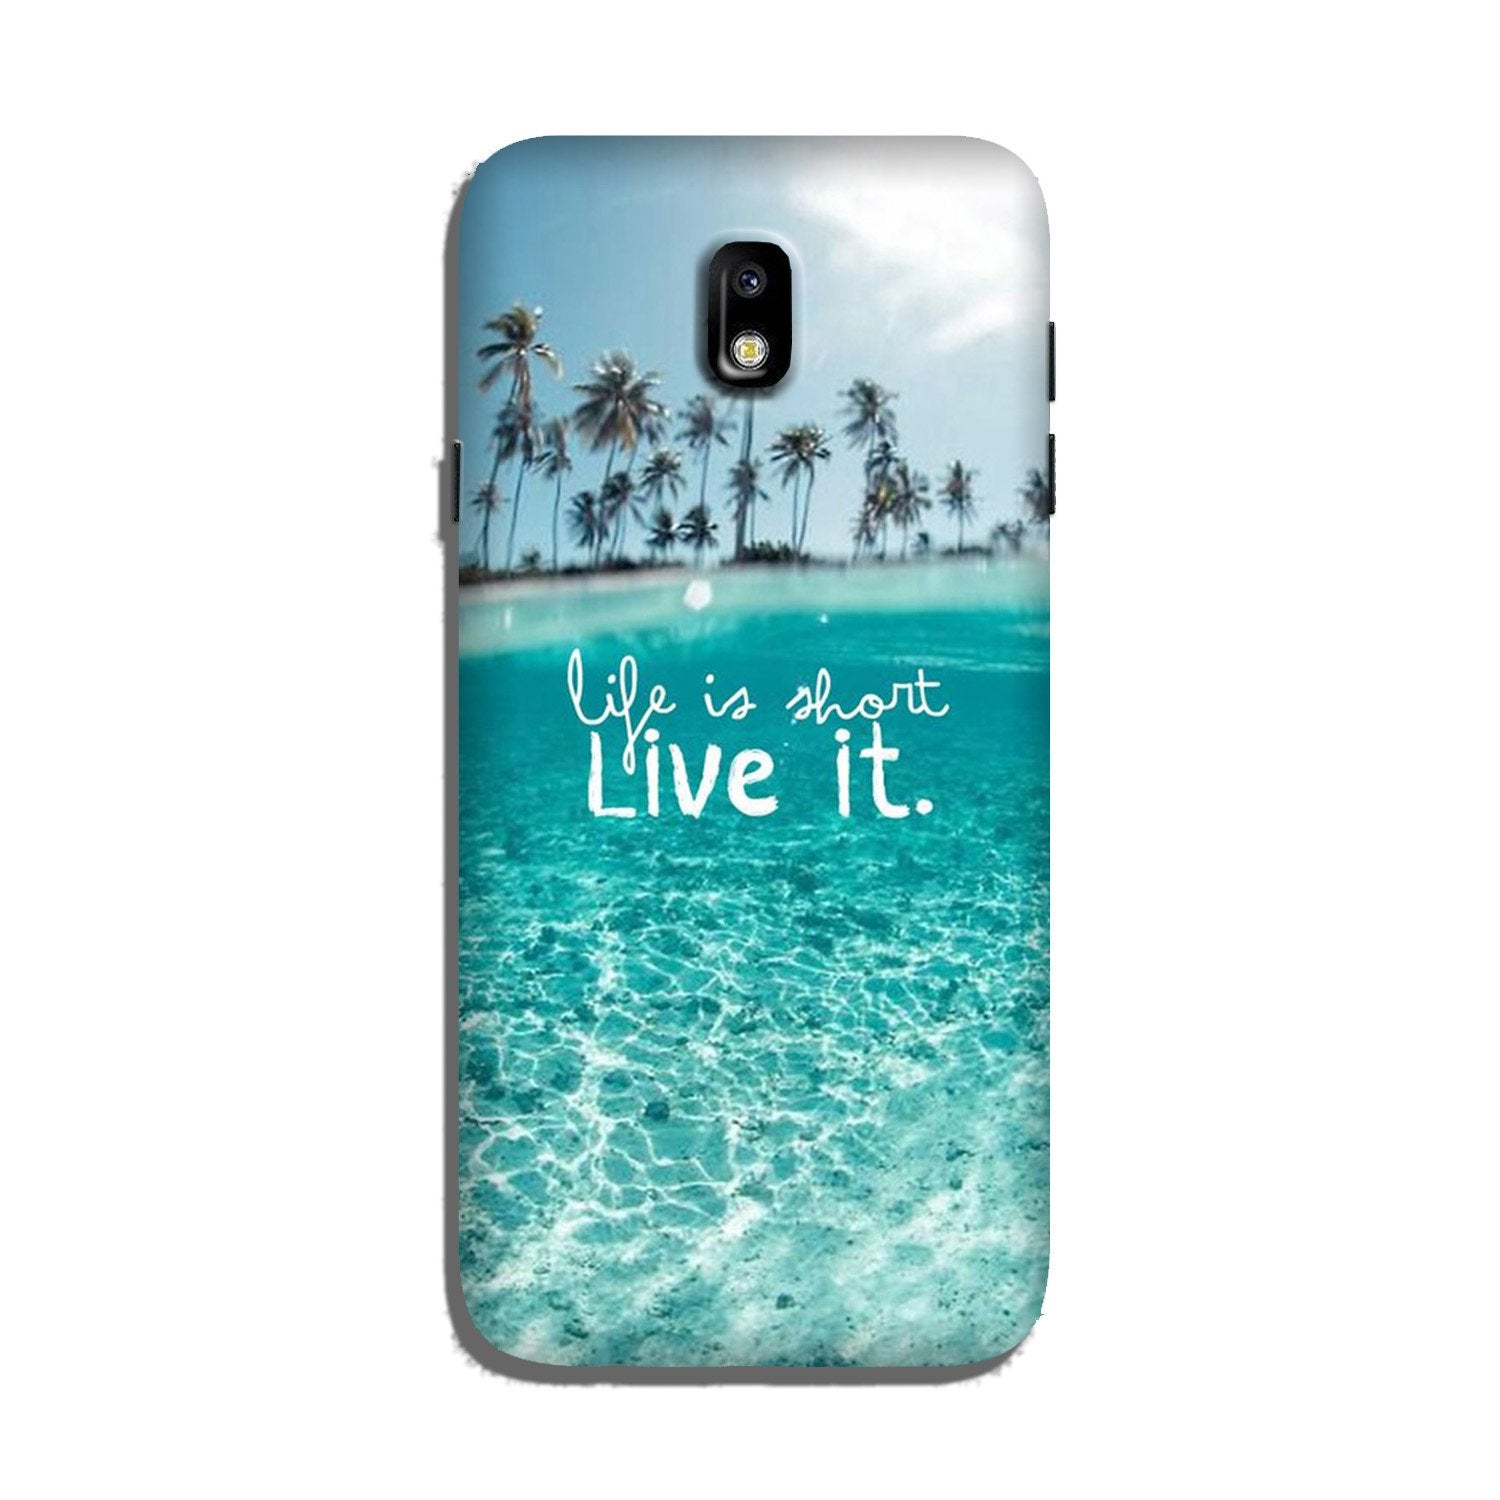 Life is short live it Case for Galaxy J7 Pro